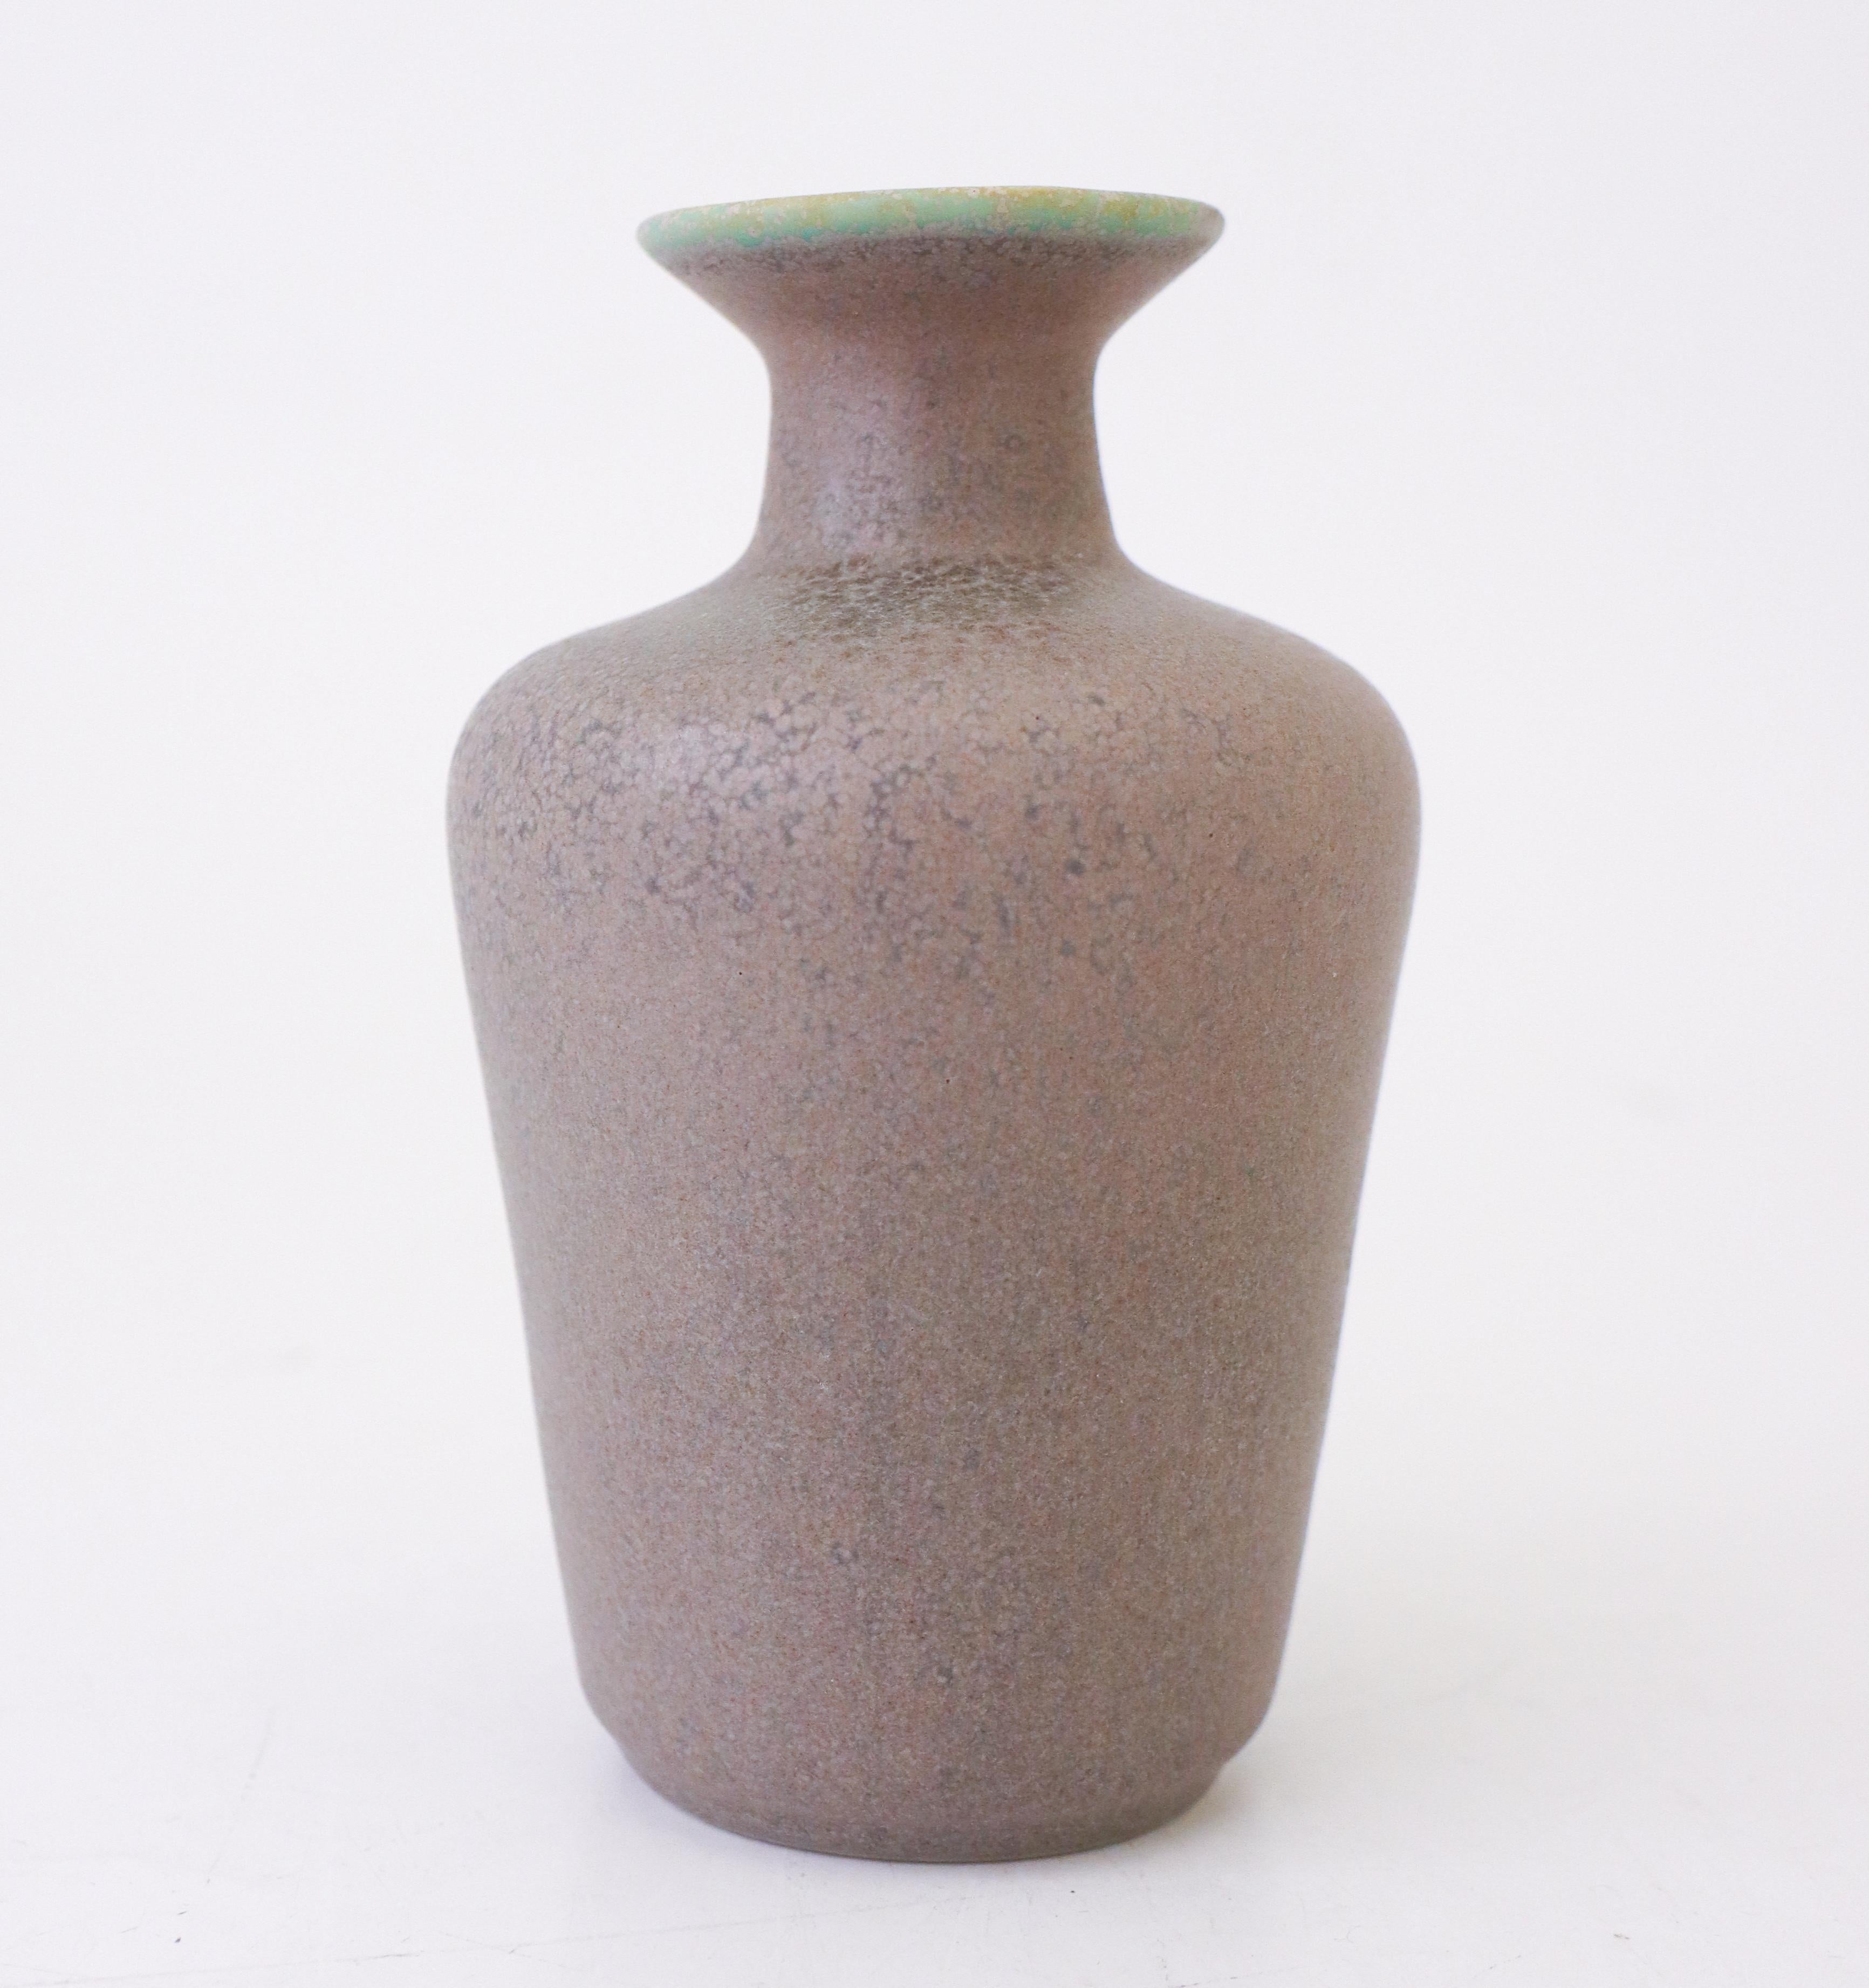 A vase with a lovely light-purple glaze designed by Gunnar Nylund at Rörstrand of model Granola, the vase is 14 cm (5.6